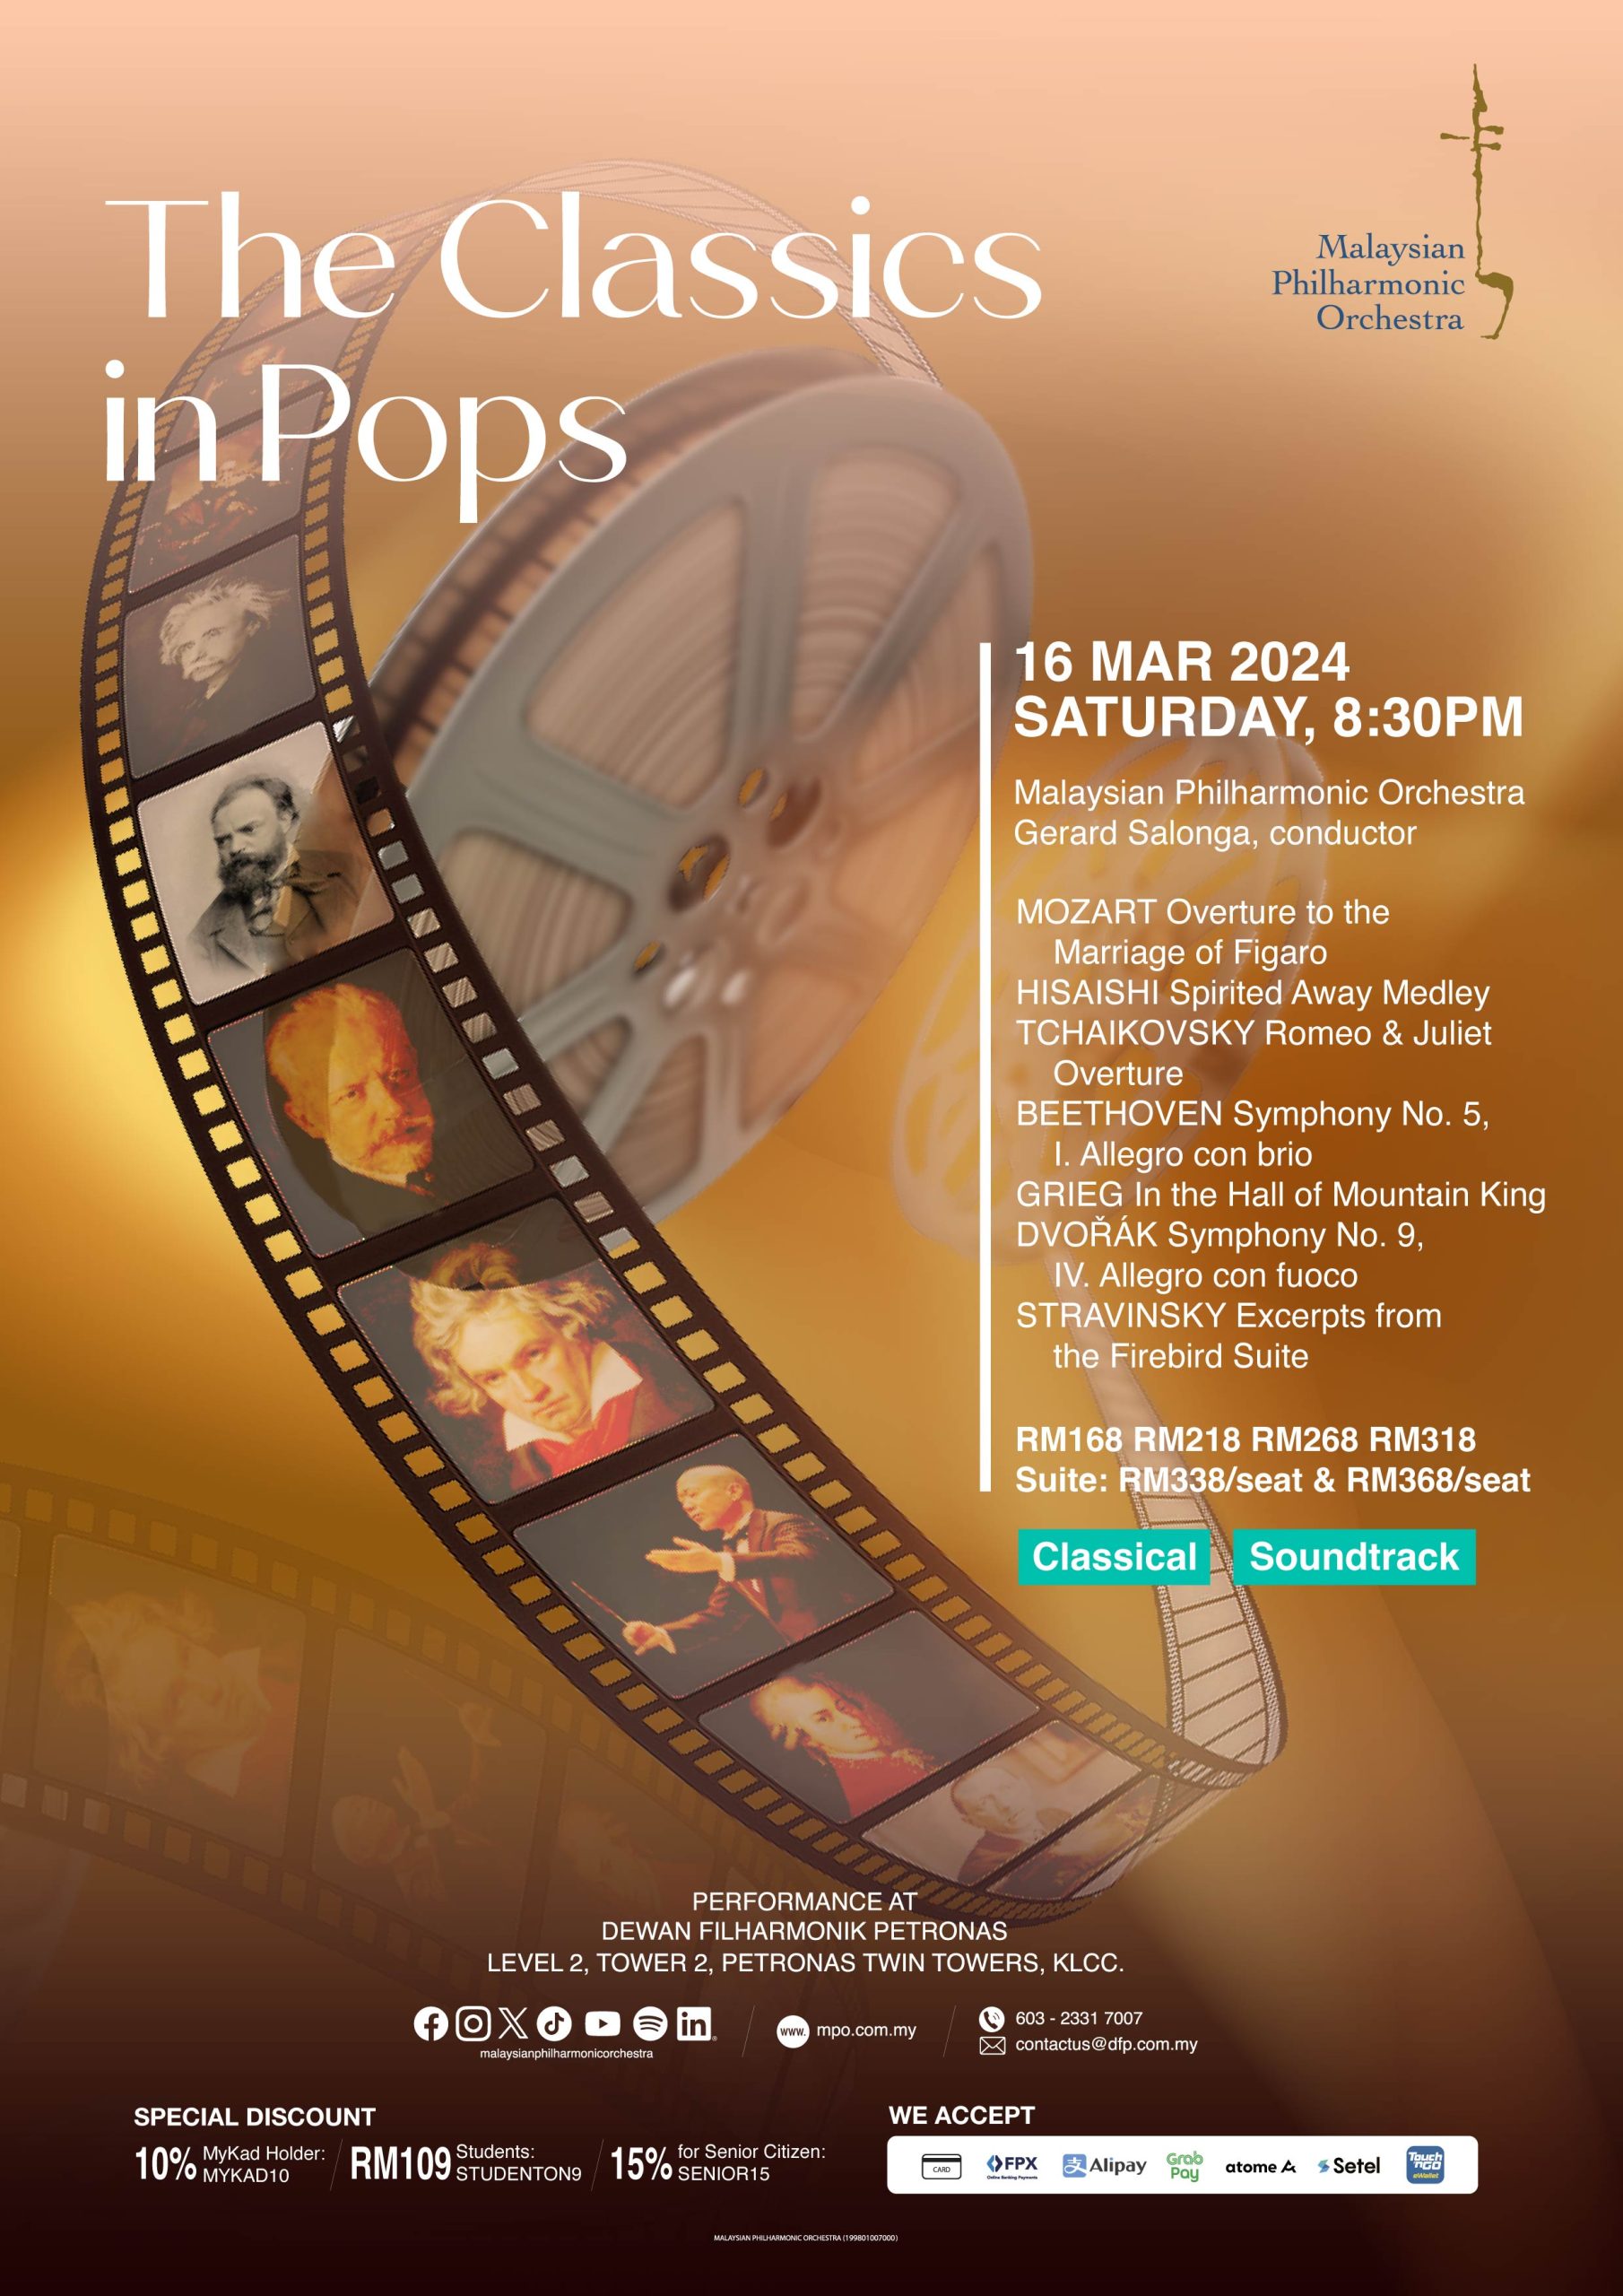 The Classics in Pops at Malaysian Philharmonic Orchestra